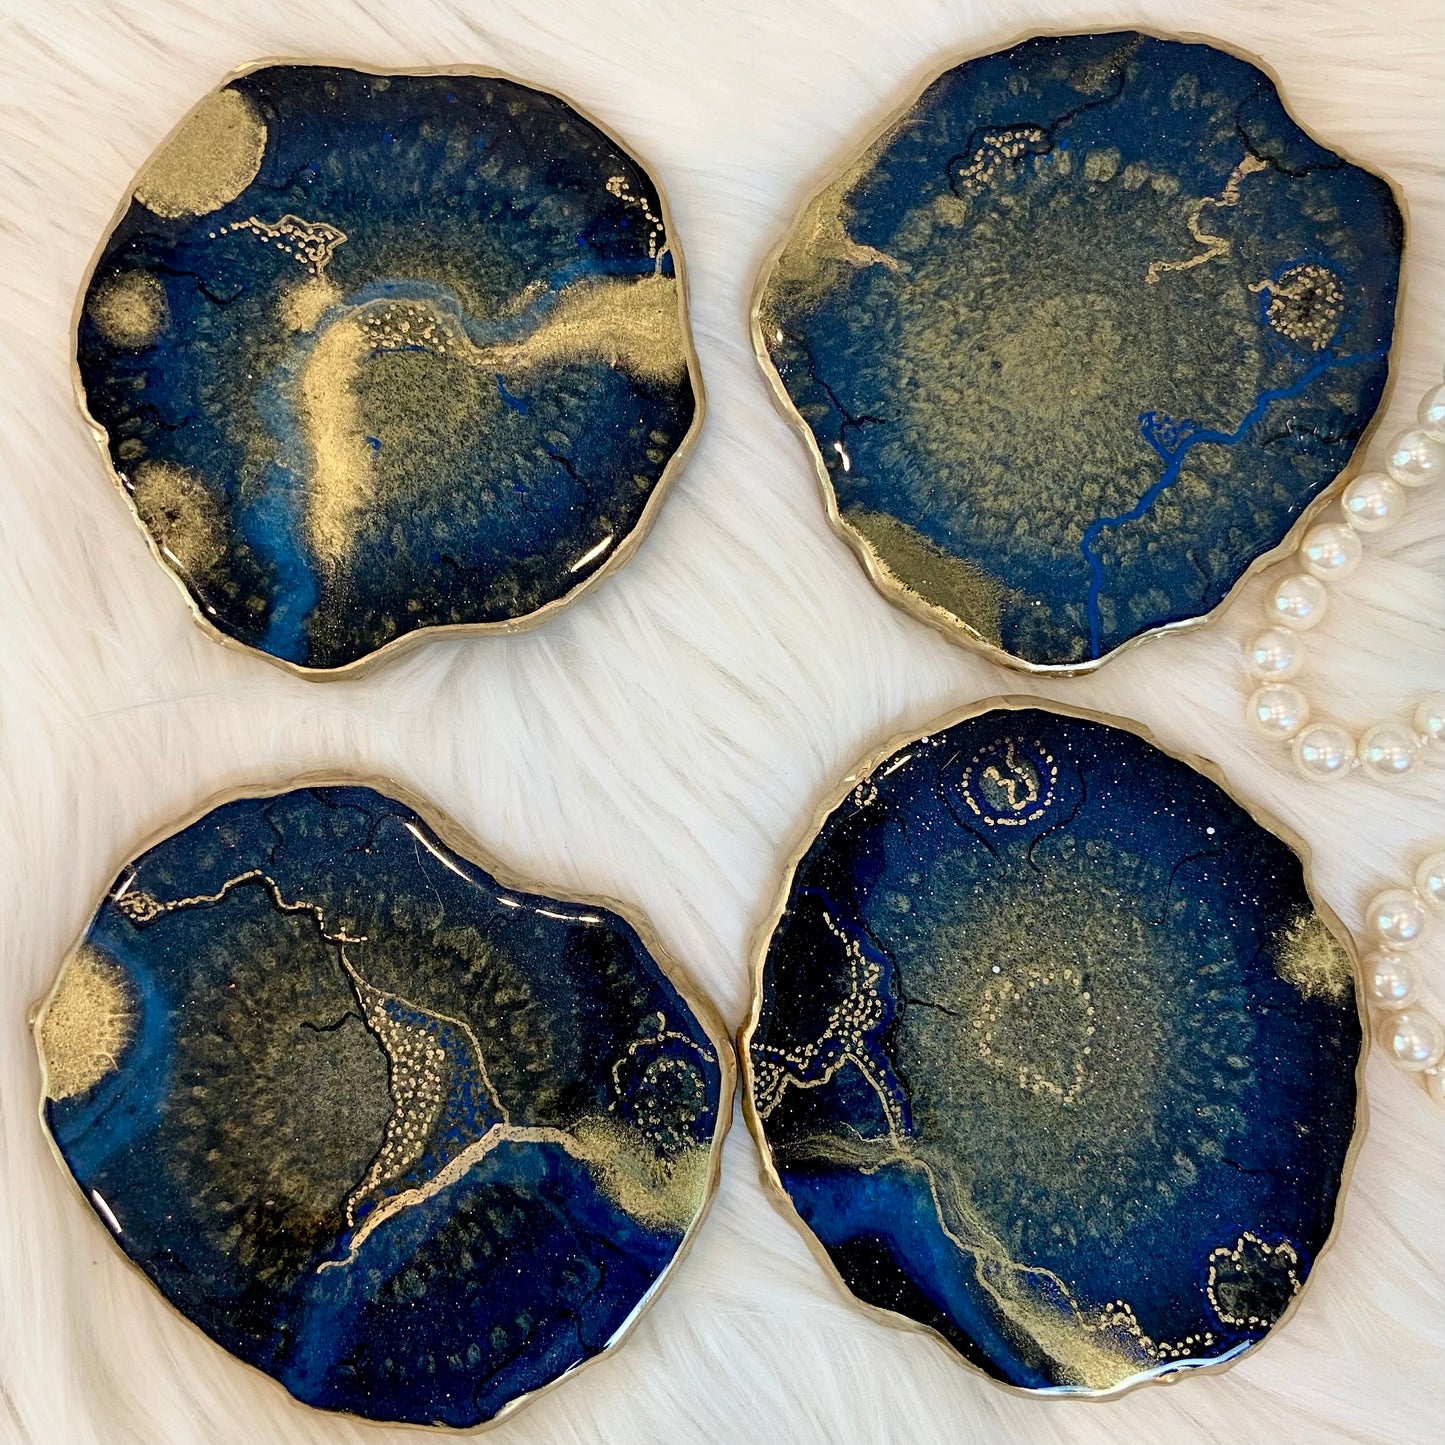 Blue Agate Resin Coasters - Set of 4